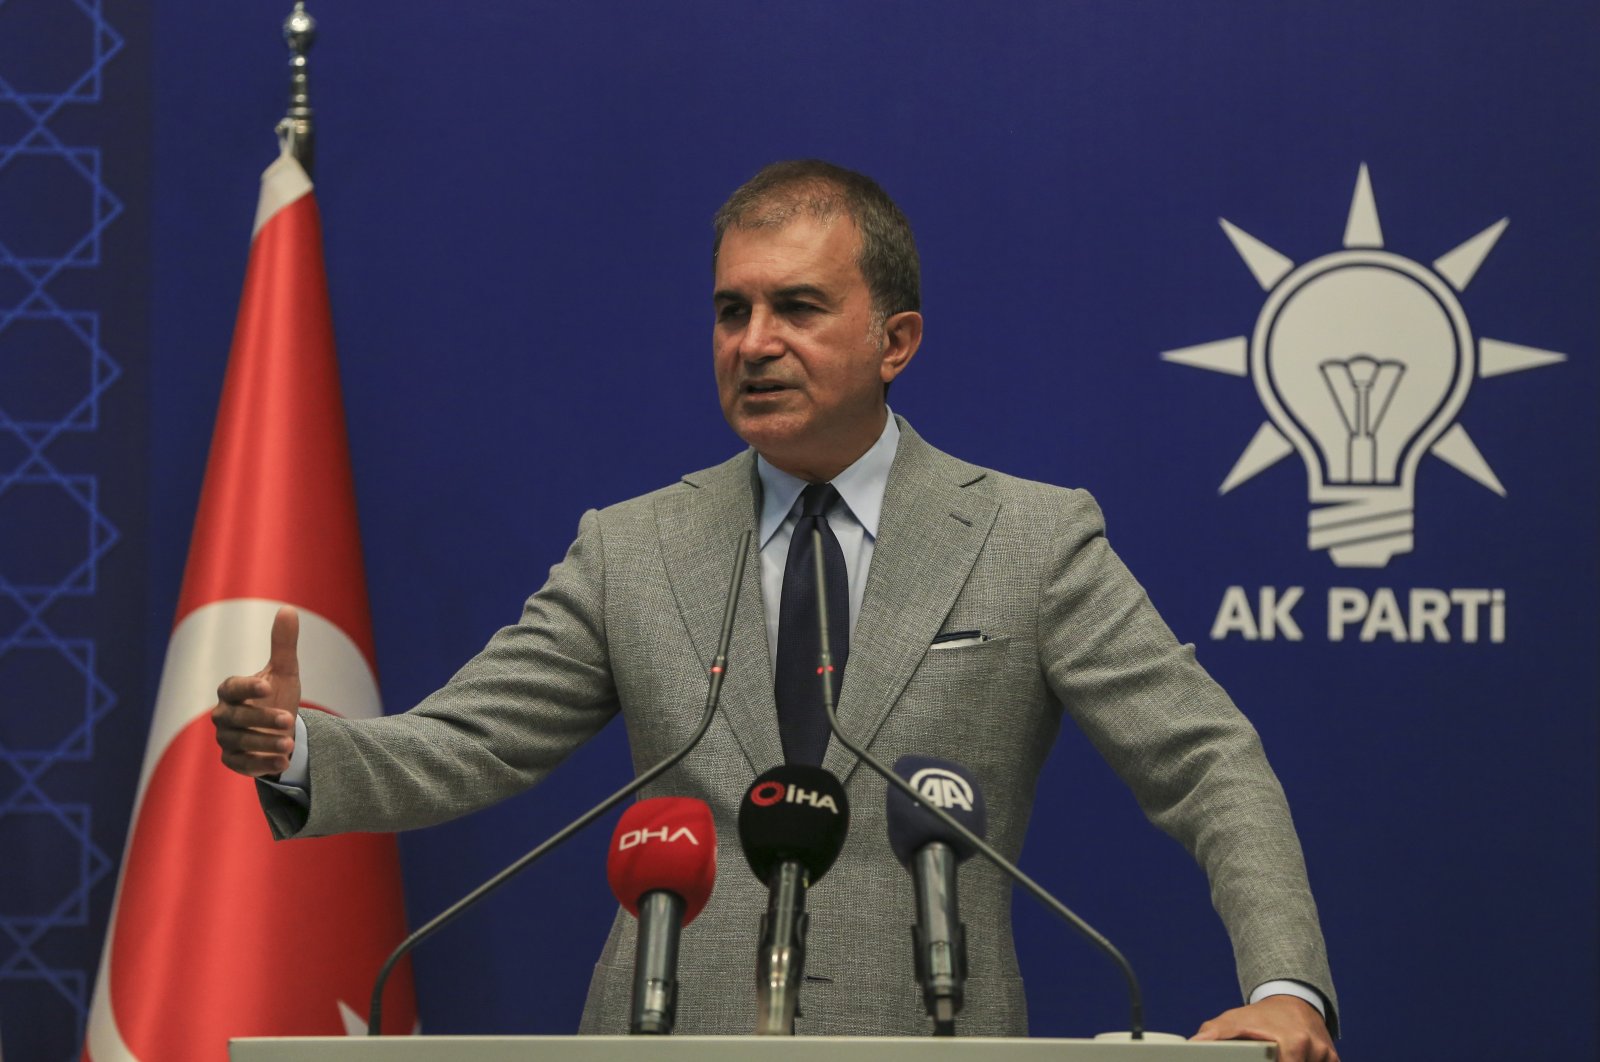 AK Party spokesman Ömer Çelik gives a statement in his party's headquarters in Ankara, Aug. 18, 2020. (AA File Photo)